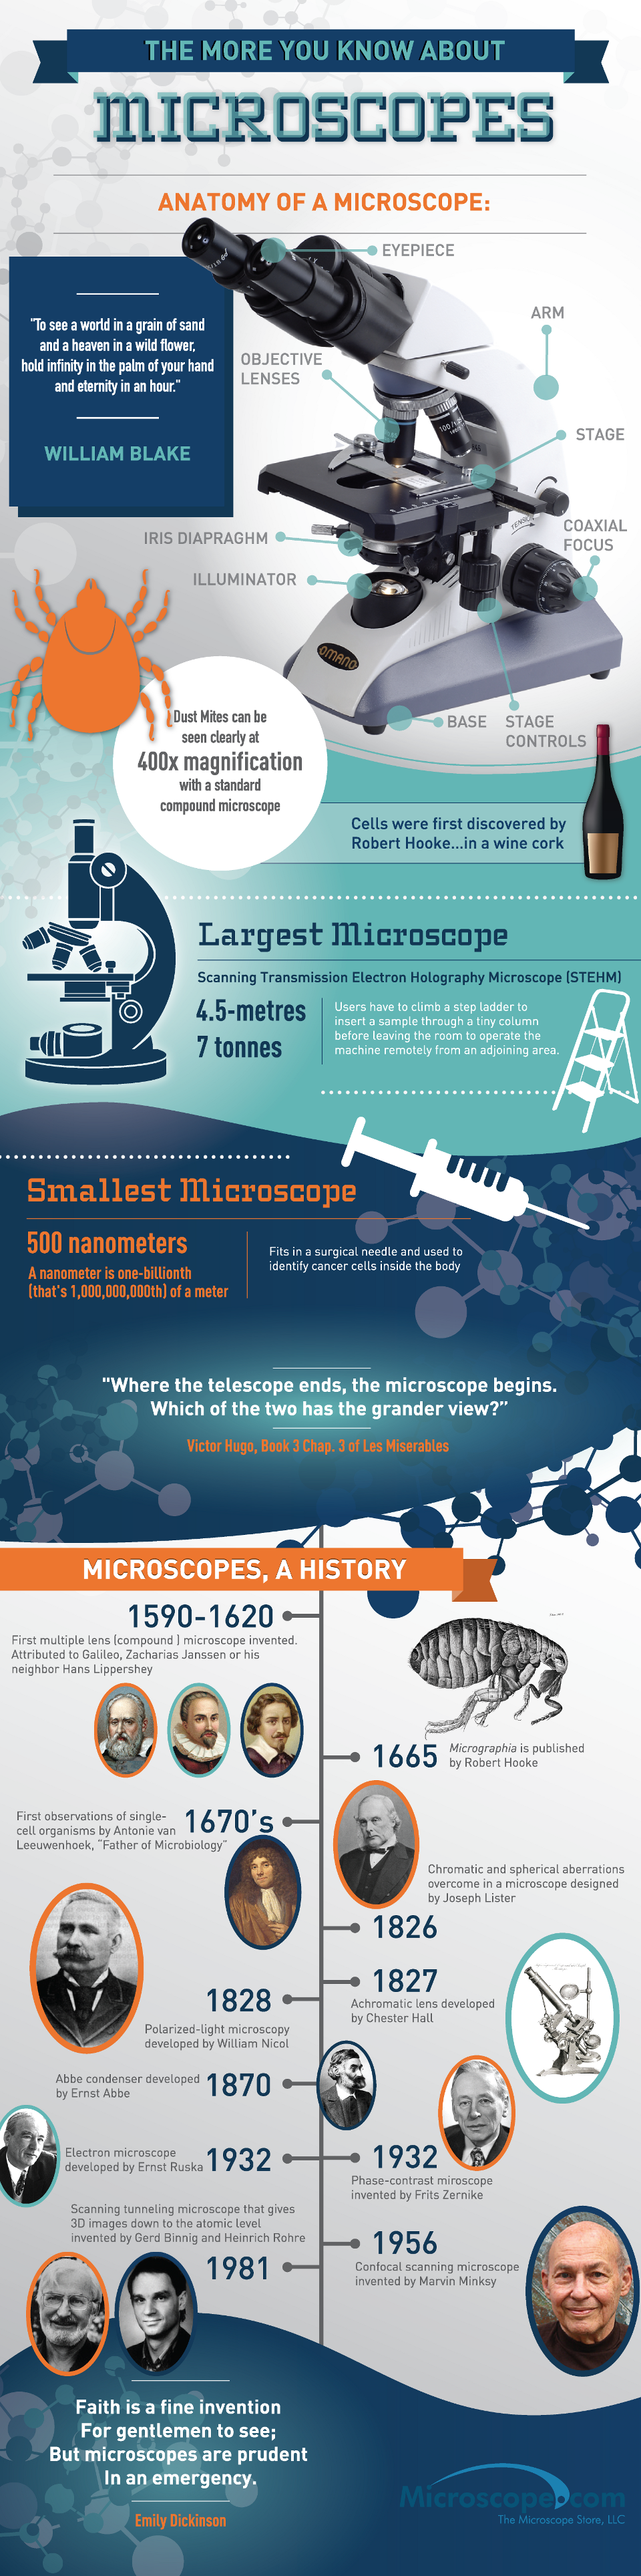 What You Need to Know About Microscopes